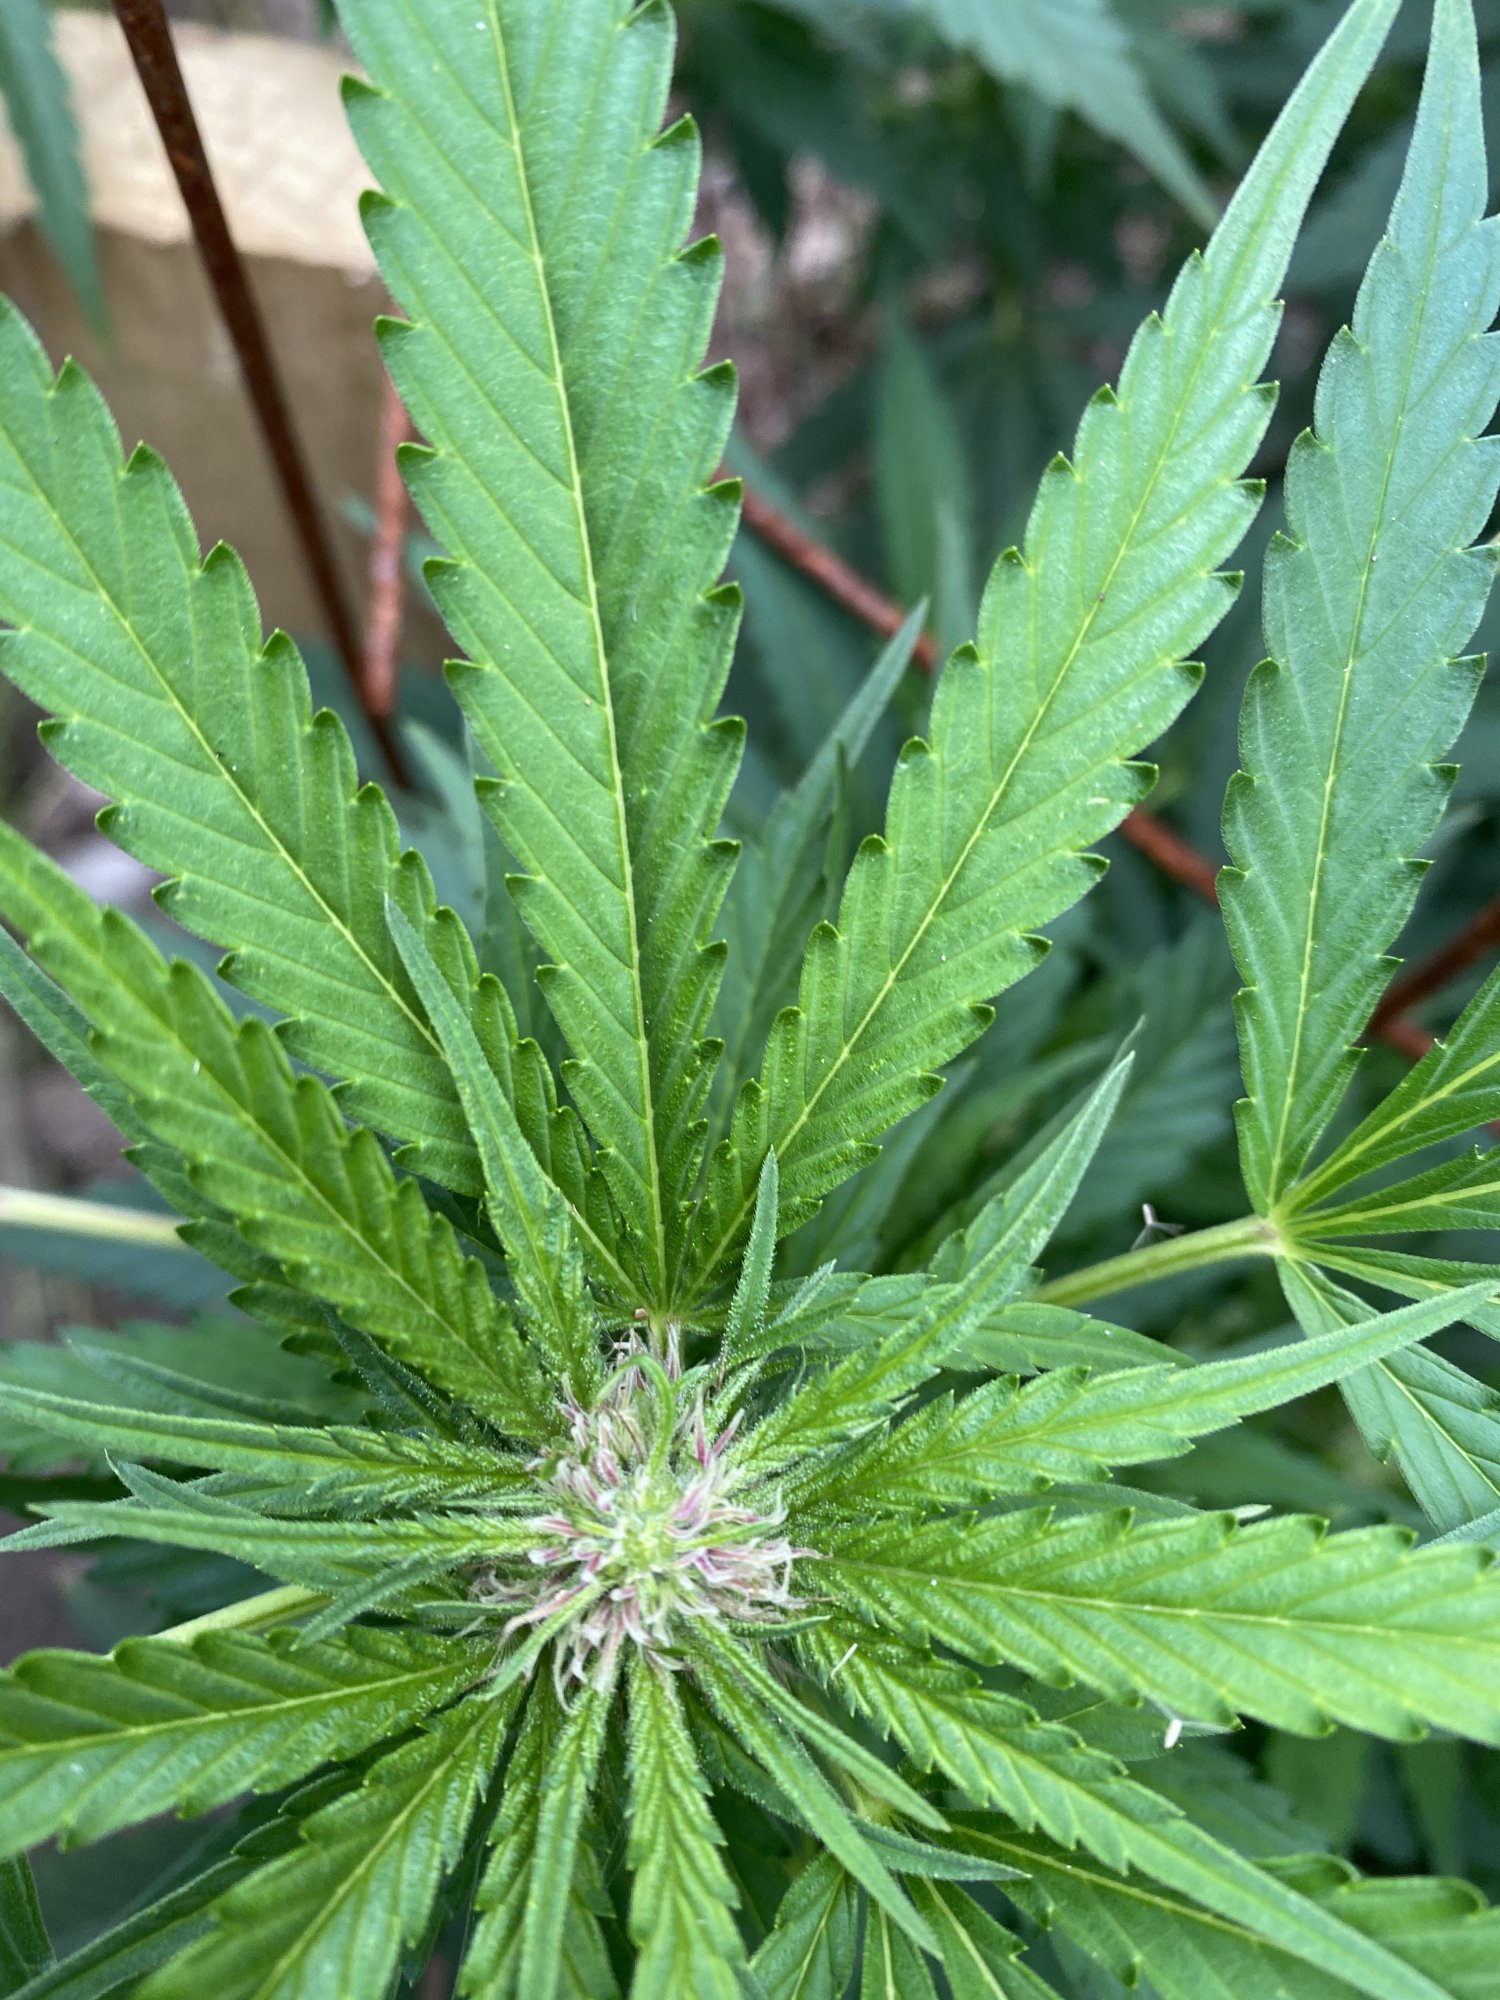 Just sharing some pics of my outdoor grow 4